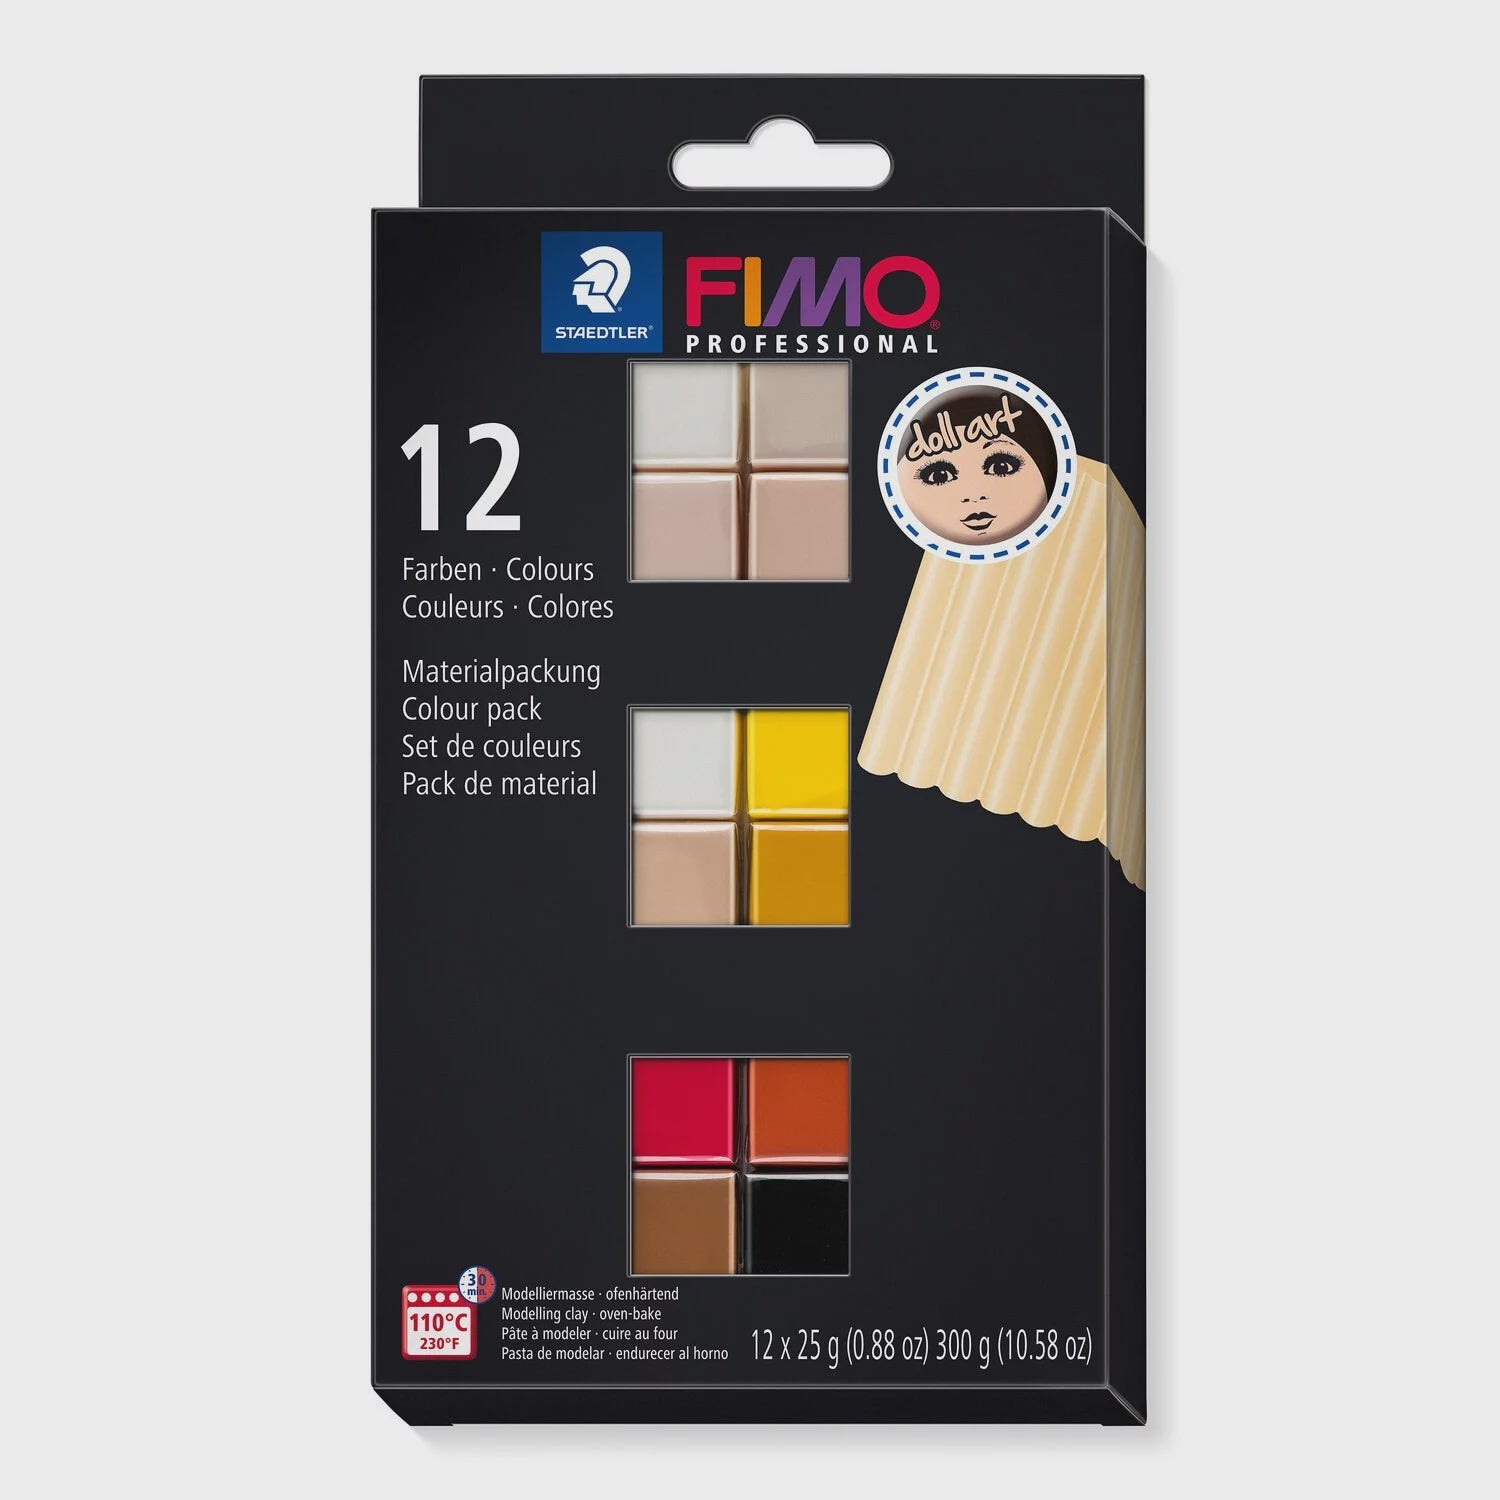 Fimo Professional 12 Colour Doll art Pack